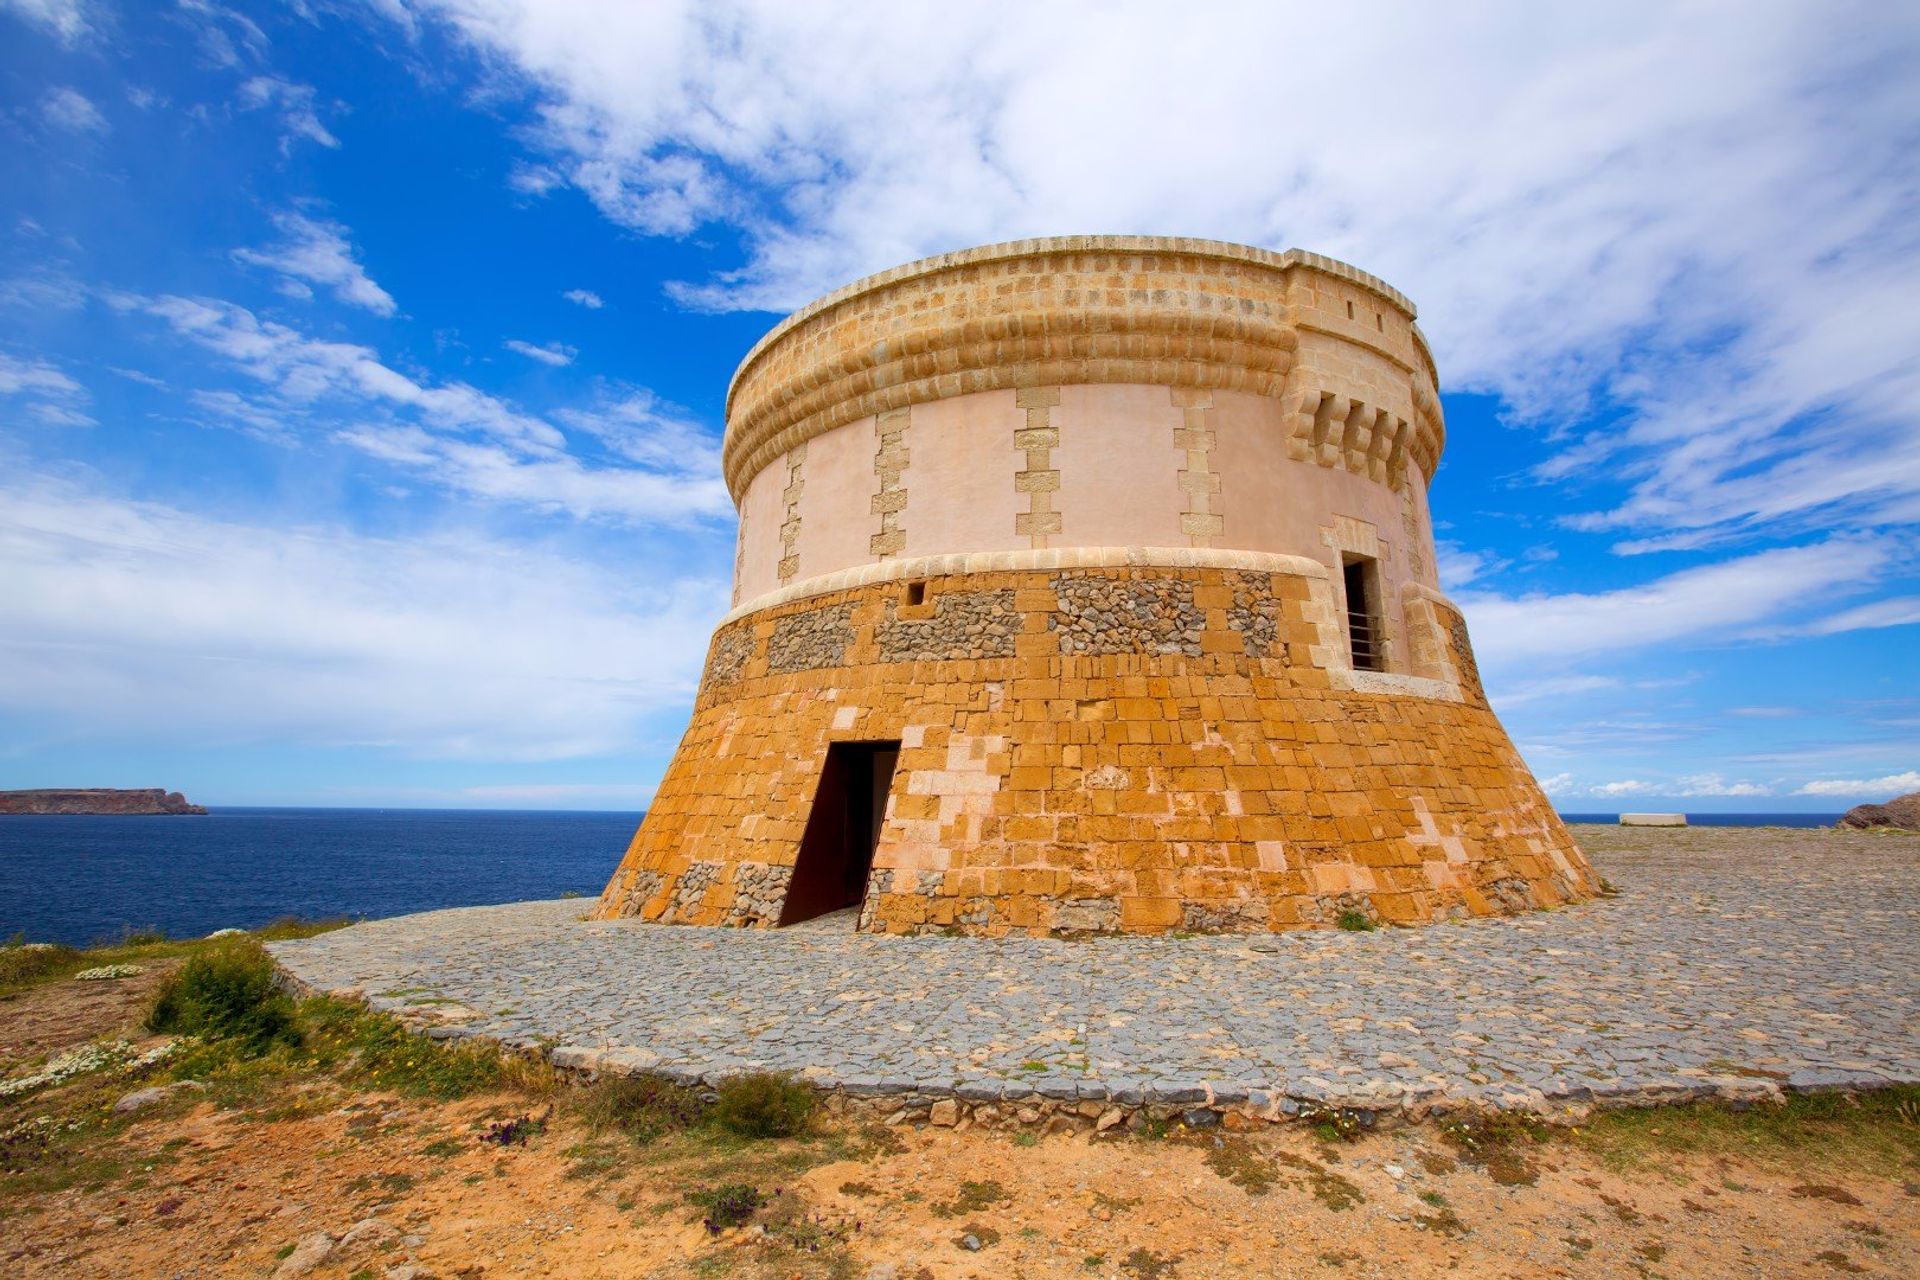 Fornells Tower on Menorca's northern coast - built under British rule during the 19th Century